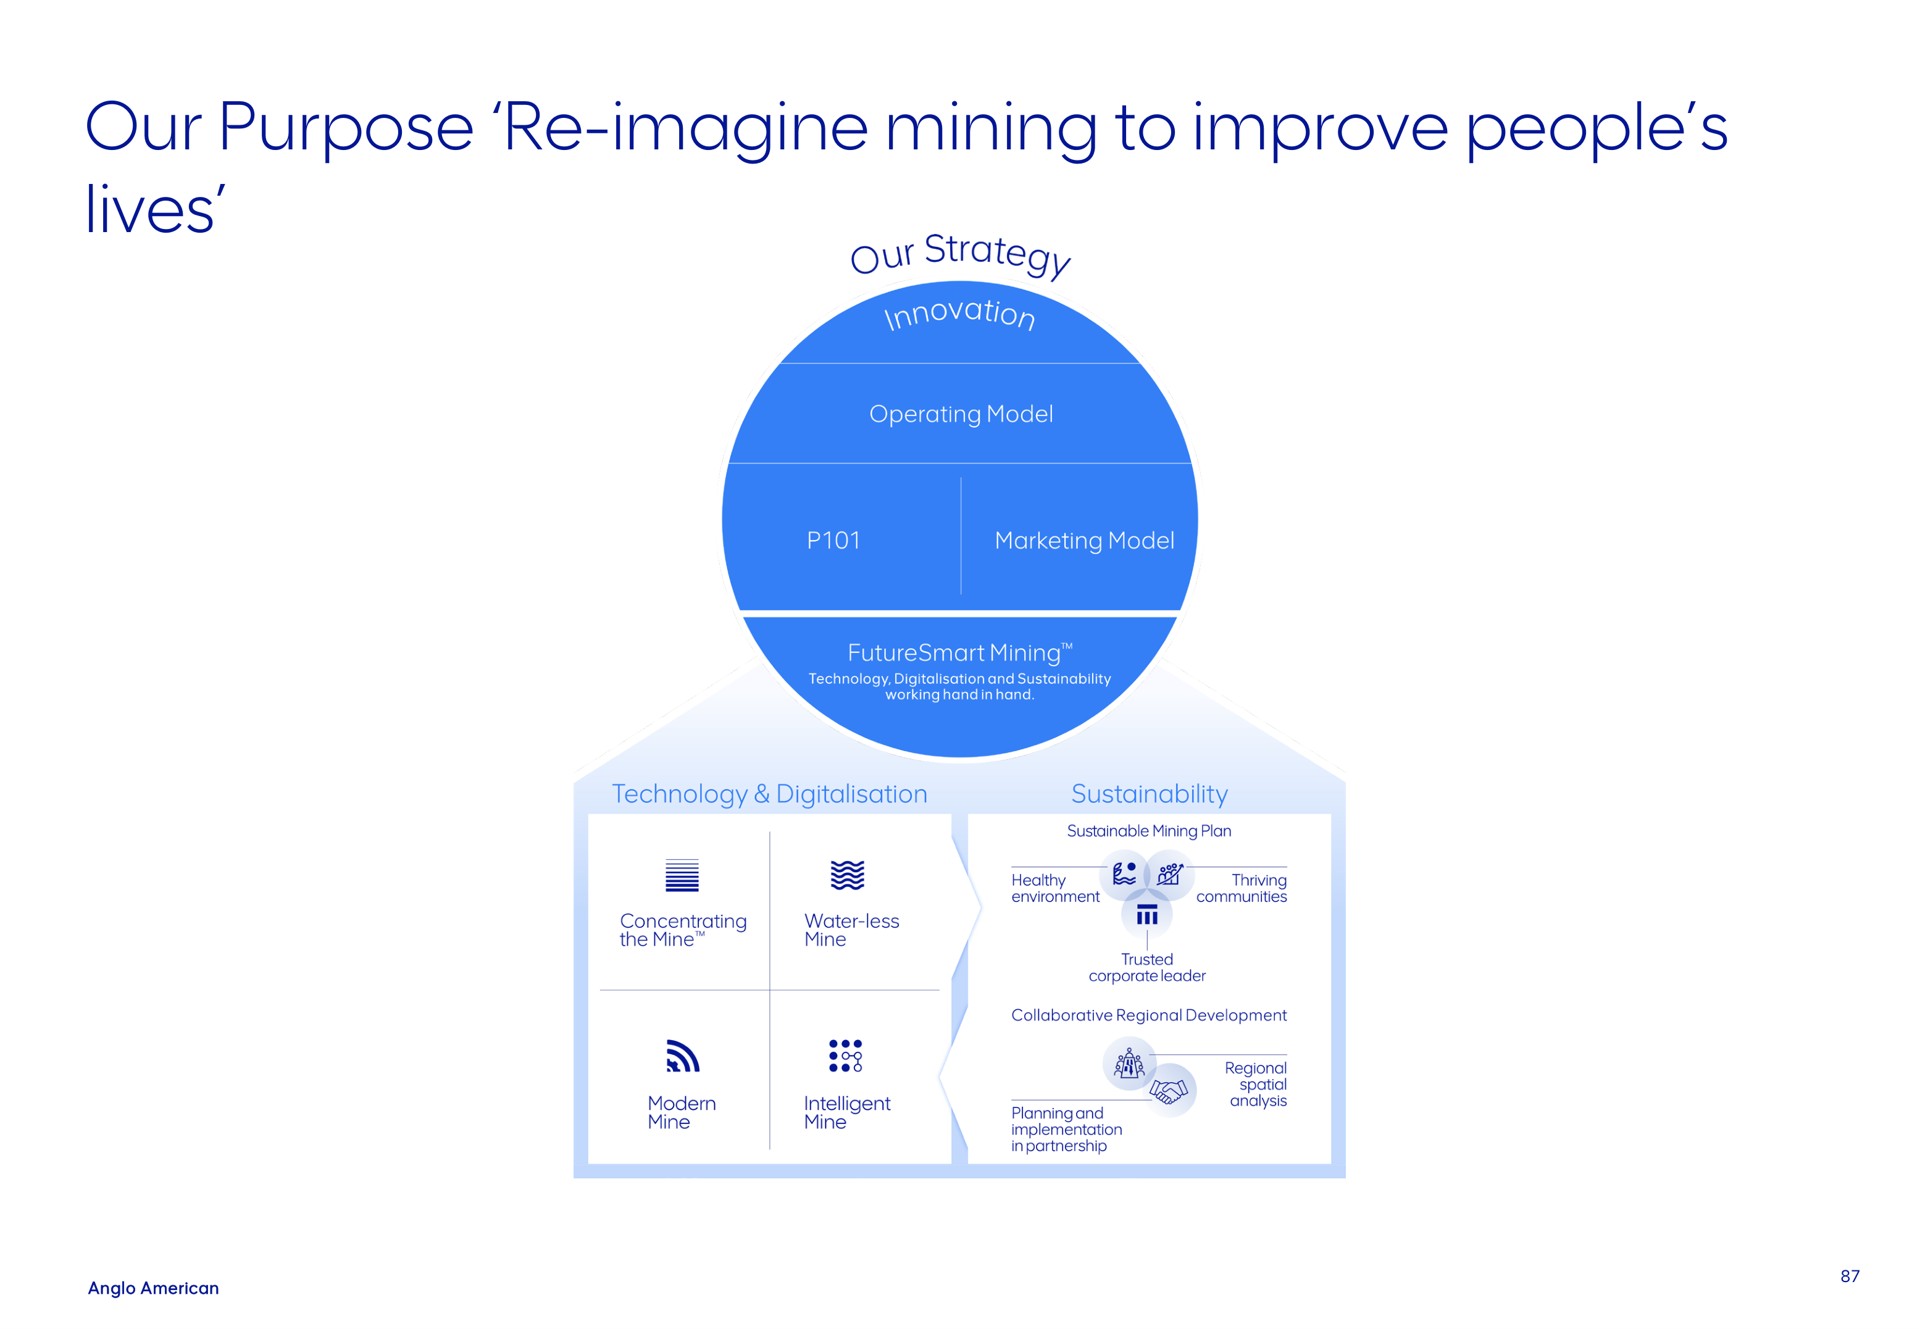 our purpose imagine mining to improve people lives strategy operating model marketing model technology and working hand in hand technology concentrating the mine water less mine a modern mine intelligent mine sustainable plan healthy environment i thriving communities trusted corporate leader collaborative regional development analysis as planning and implementation in partnership | AngloAmerican